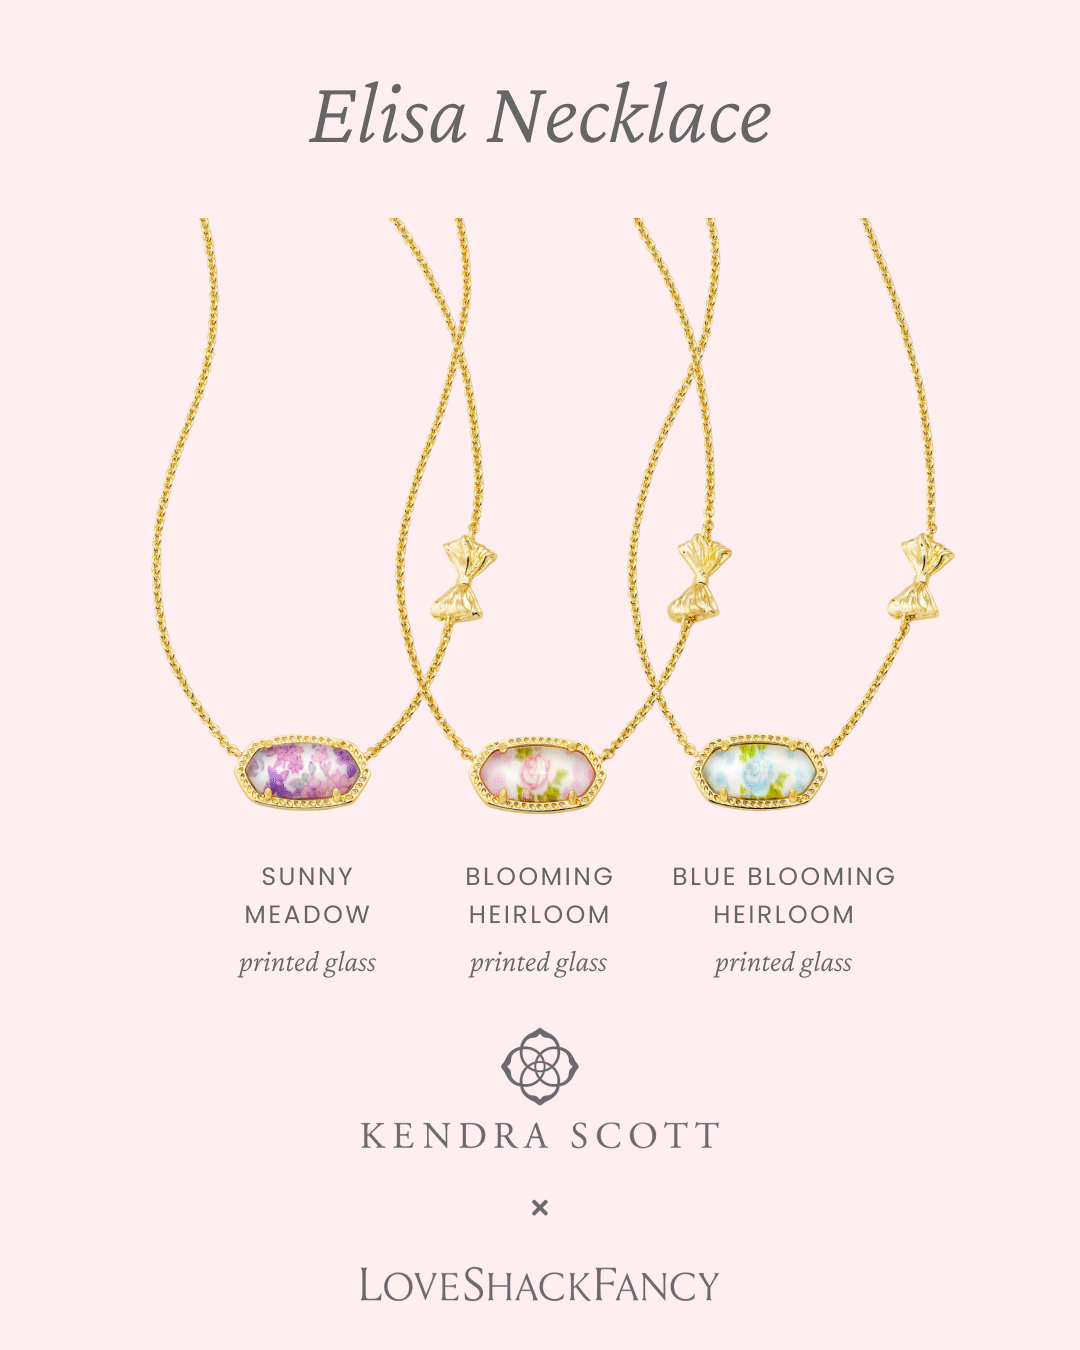 The Elisa Necklaces in three colorways from the Kendra Scott x LoveShackFancy collaboration